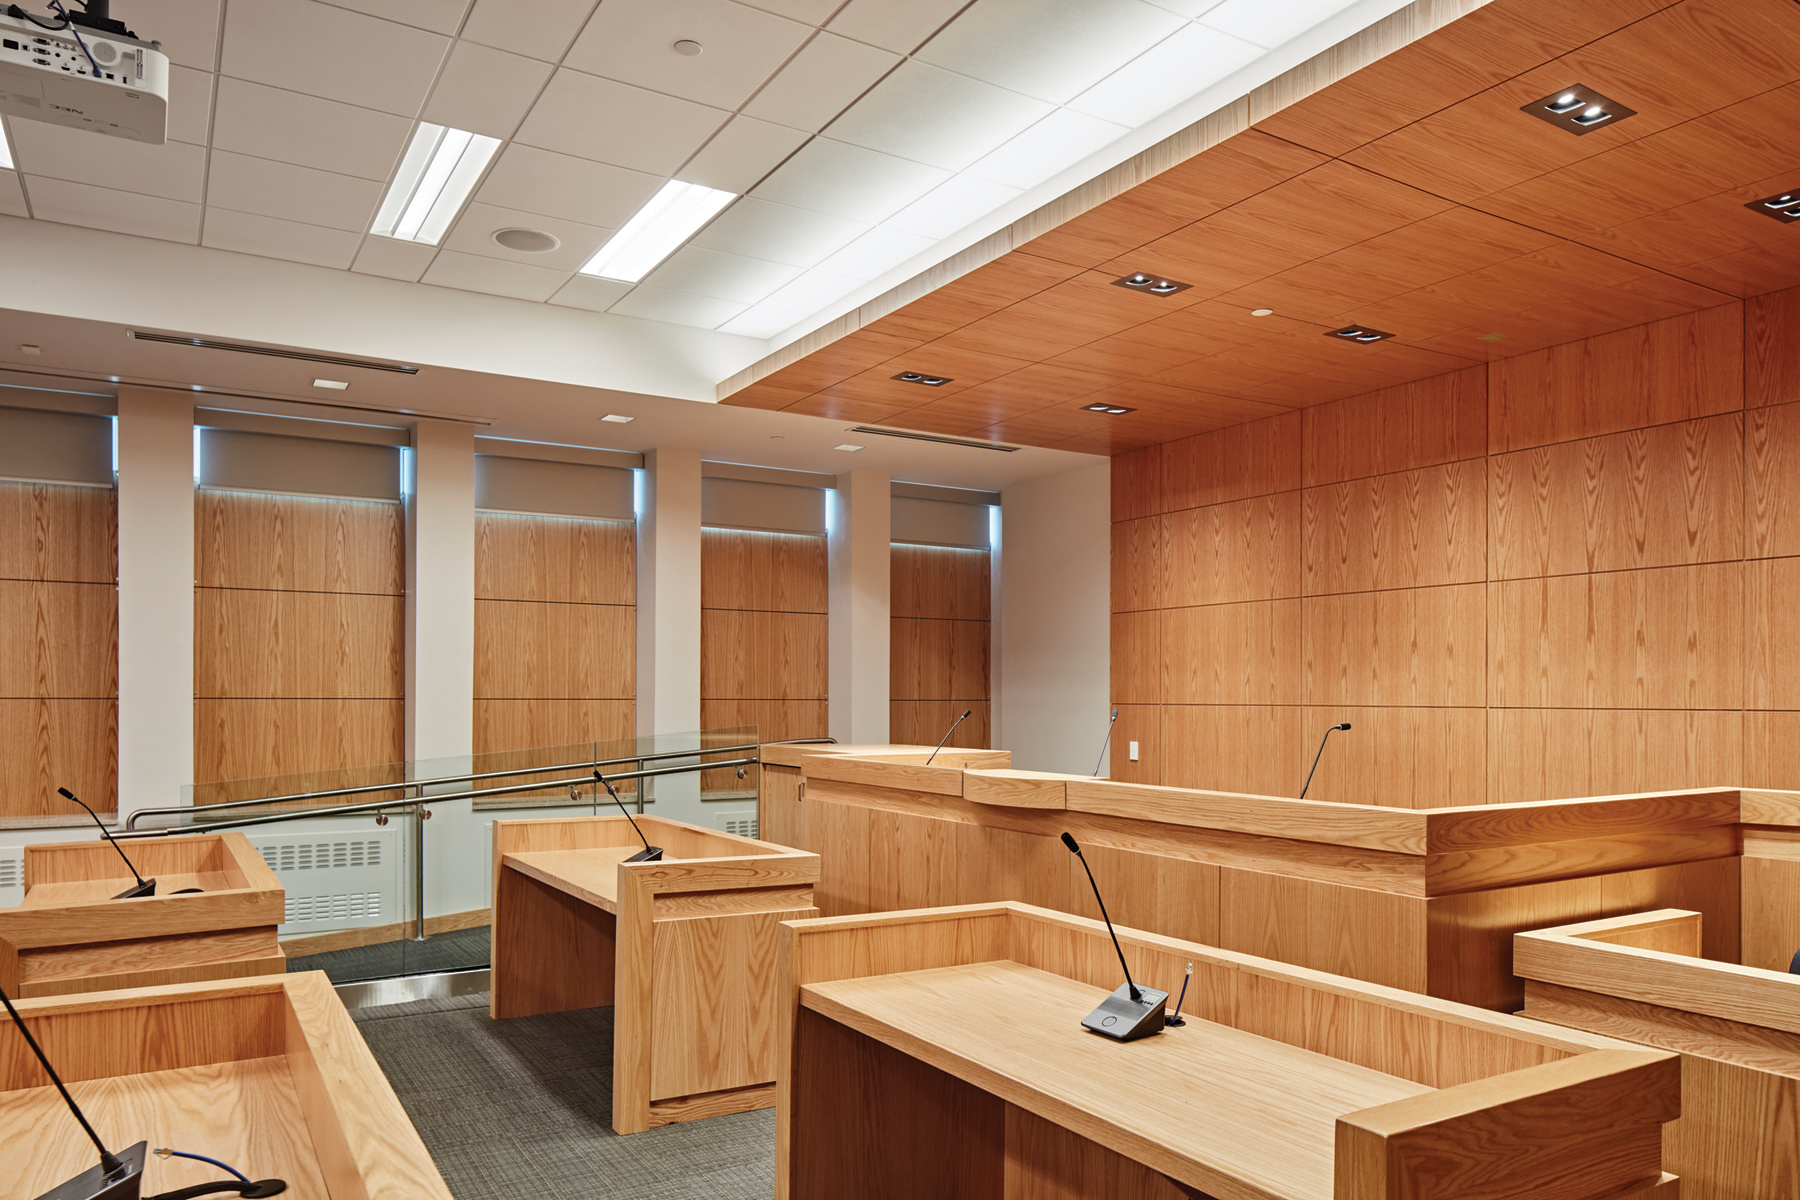 Courtroom with millwork benches for prosecution, defense, judge and witness, with wood paneling on walls